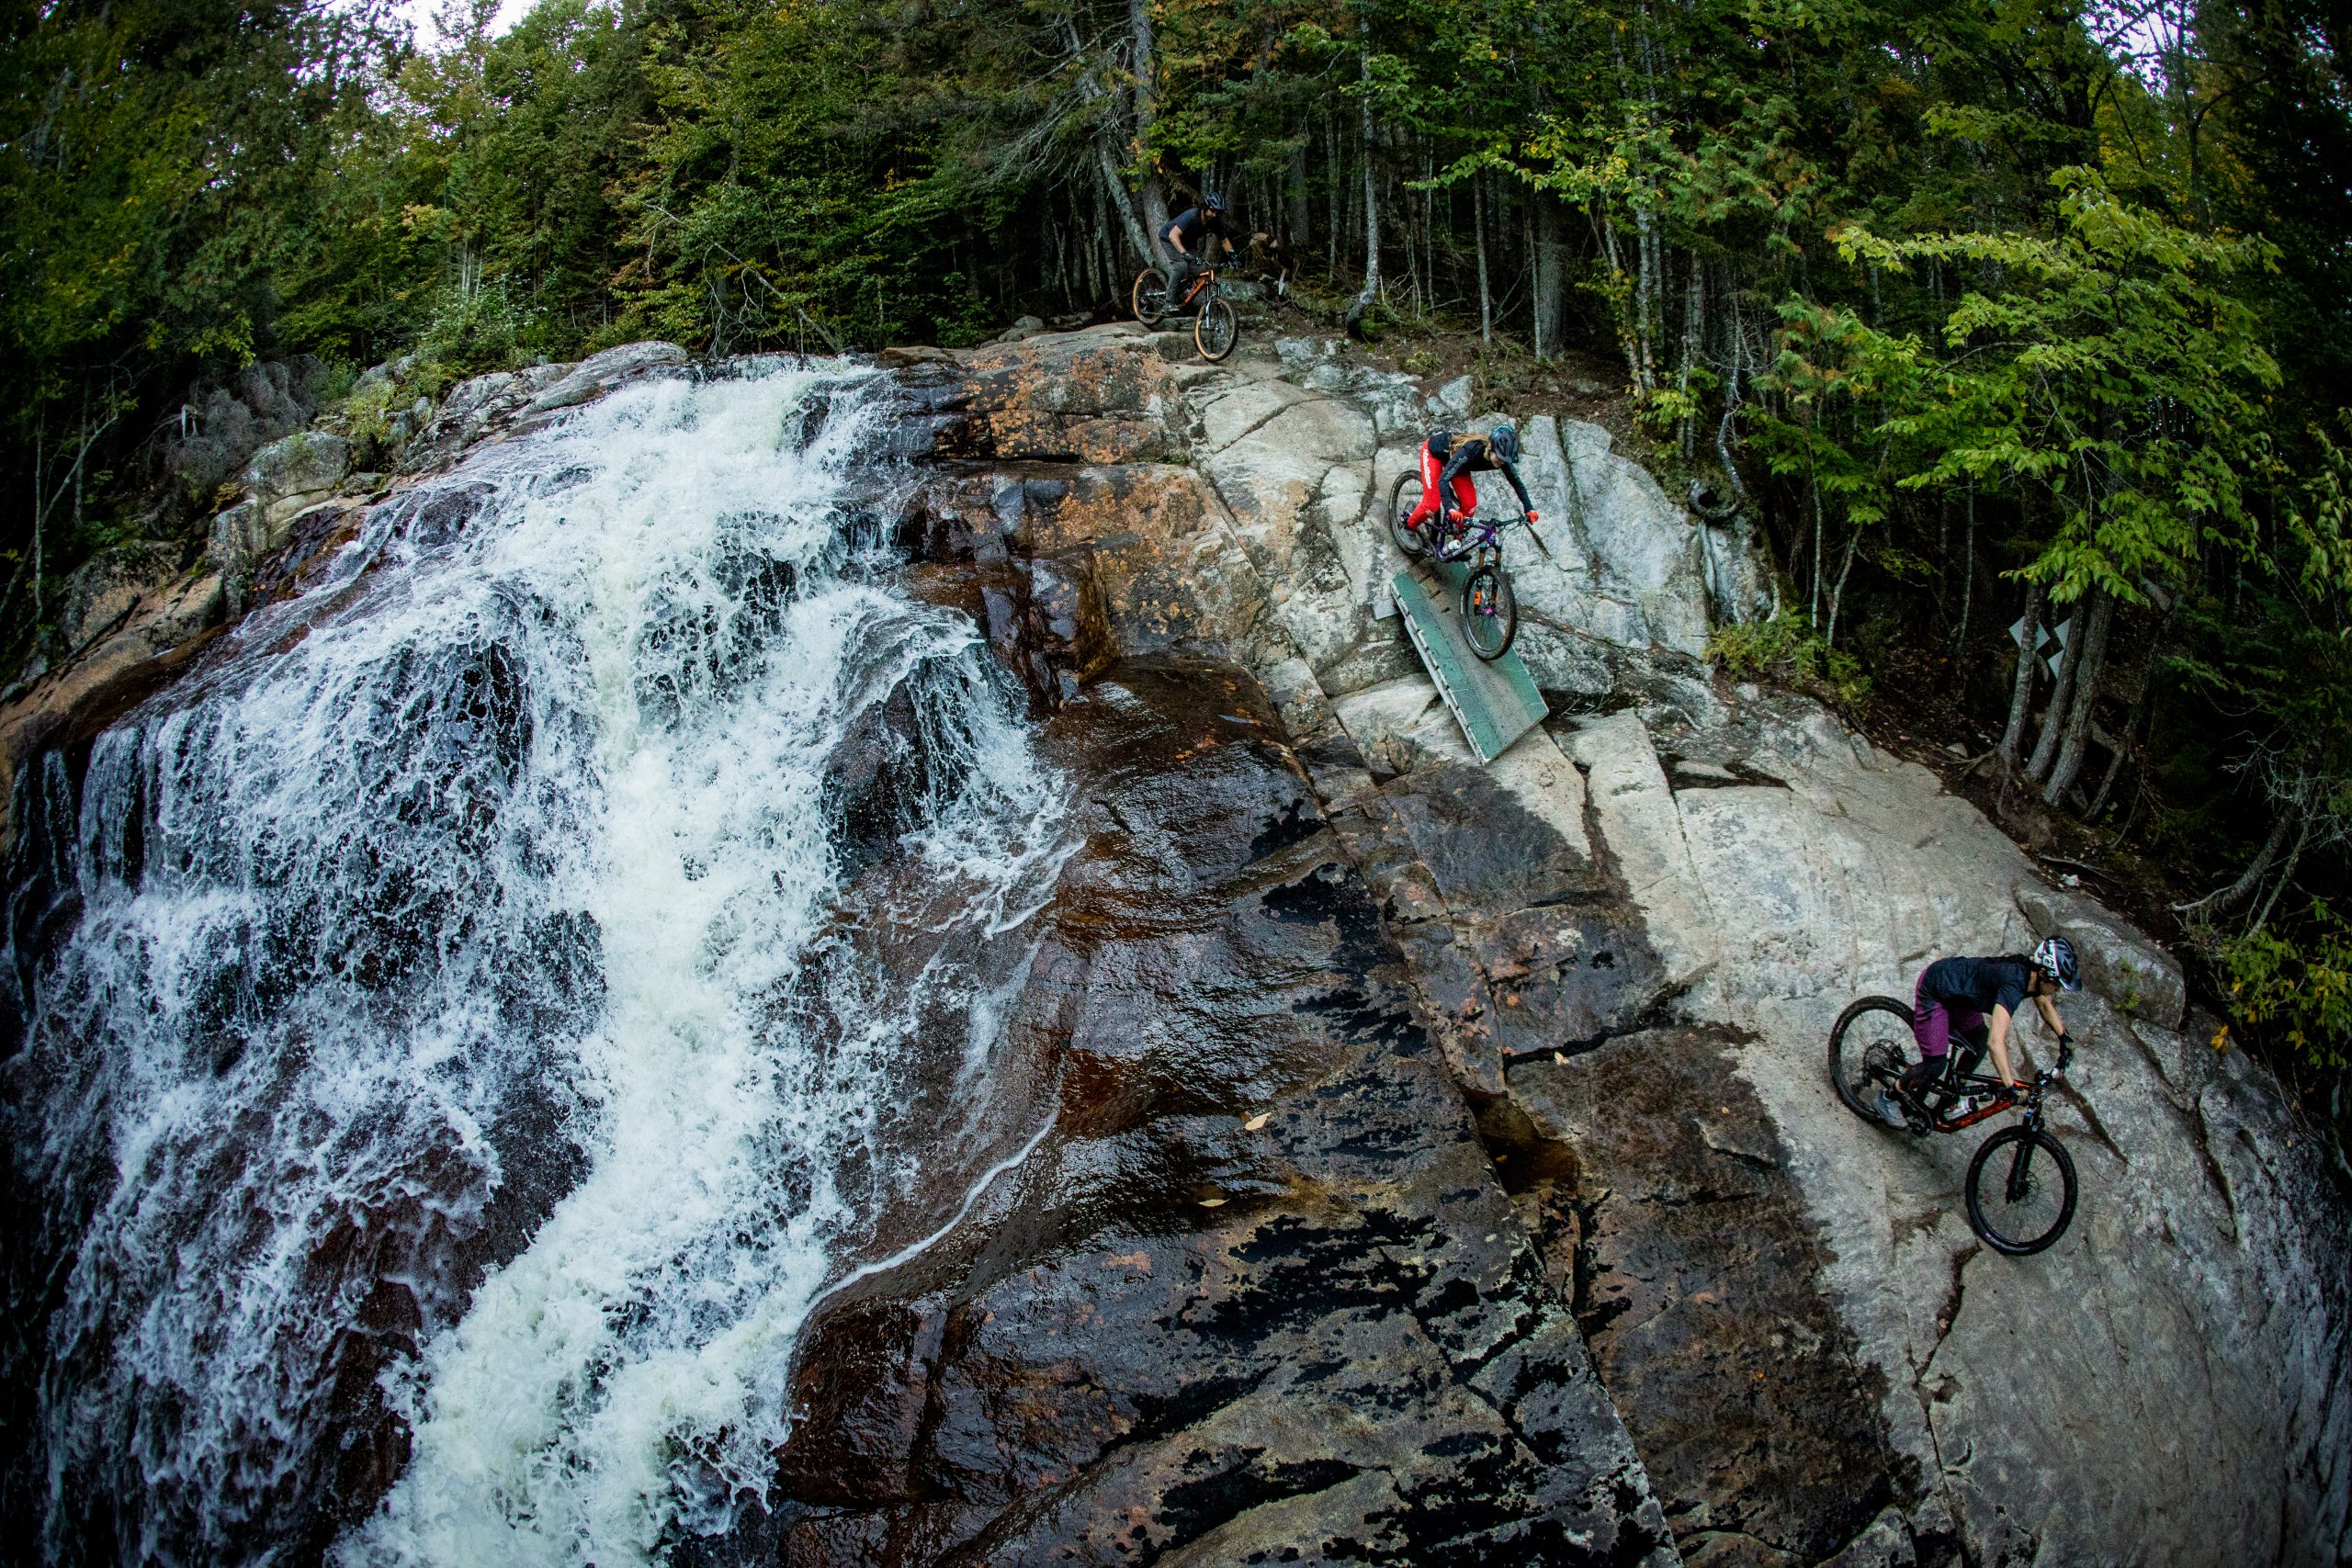 Two cyclists enjoying the outdoor sport of mountain biking on the Légende trail, near a waterfall and on rocky terrain.